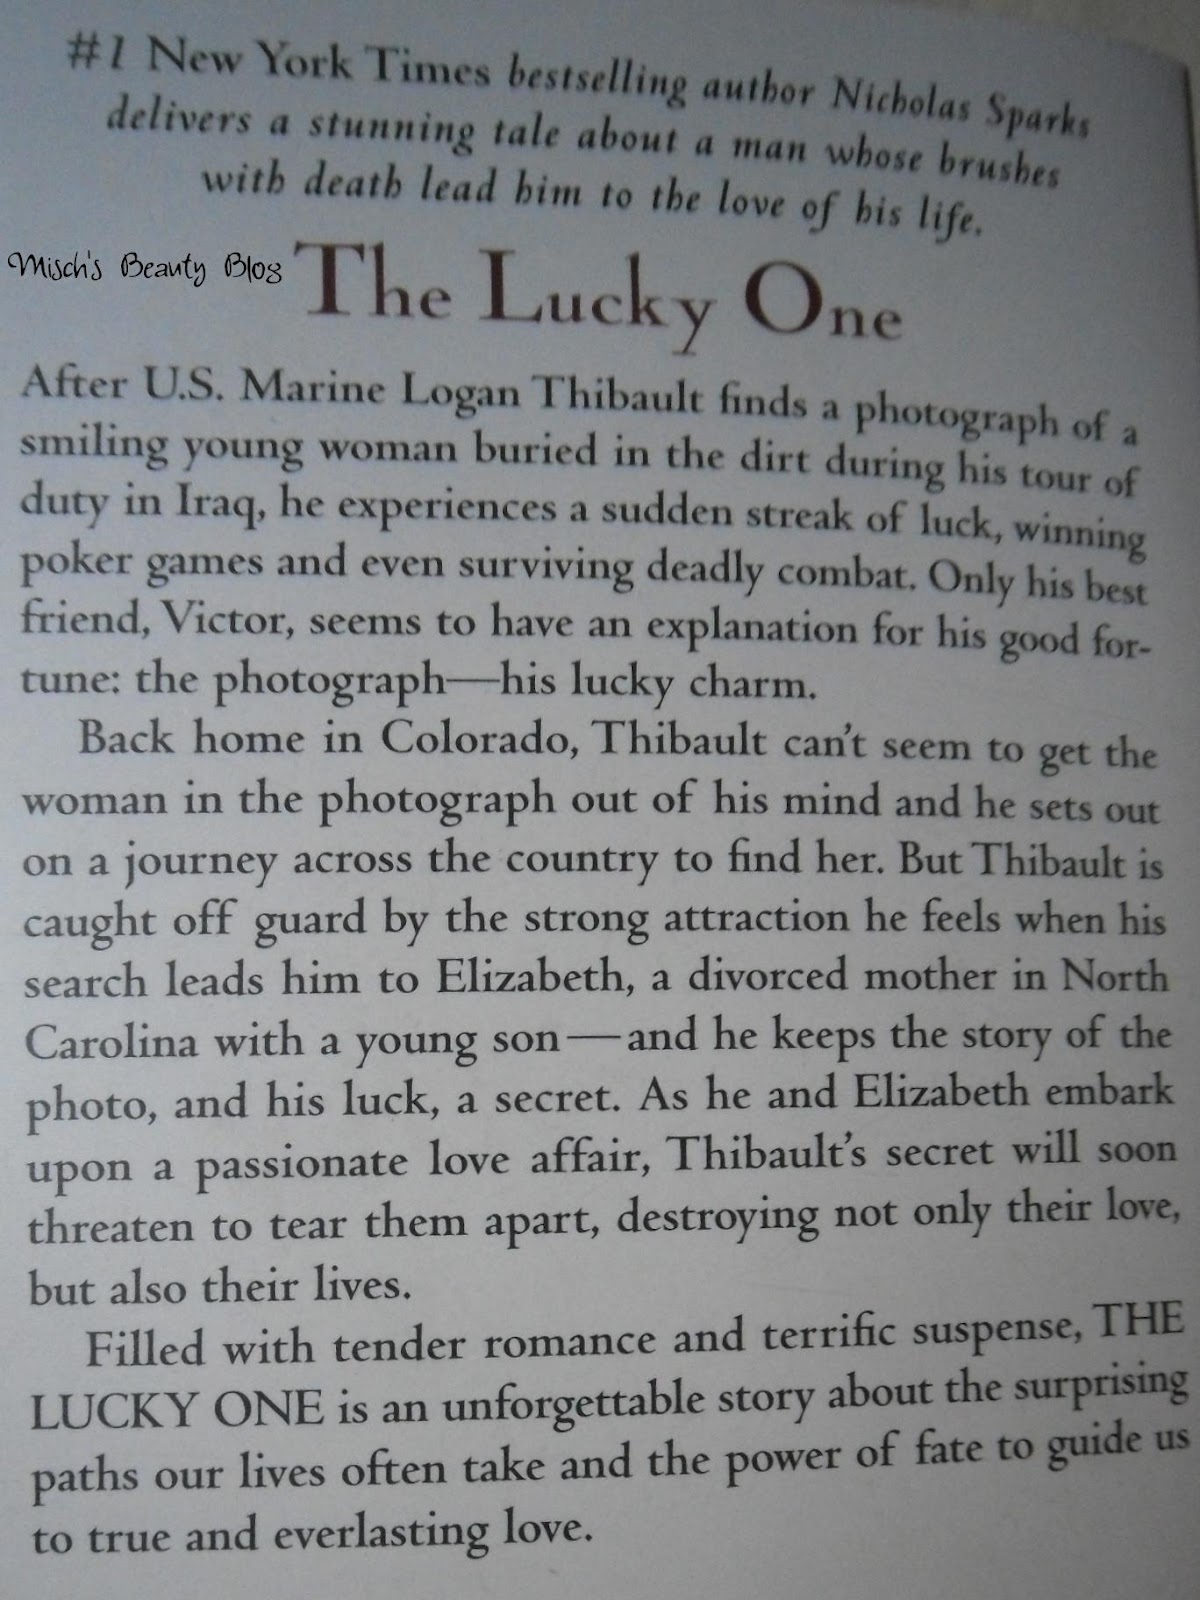 The lucky one by nicholas sparks book report